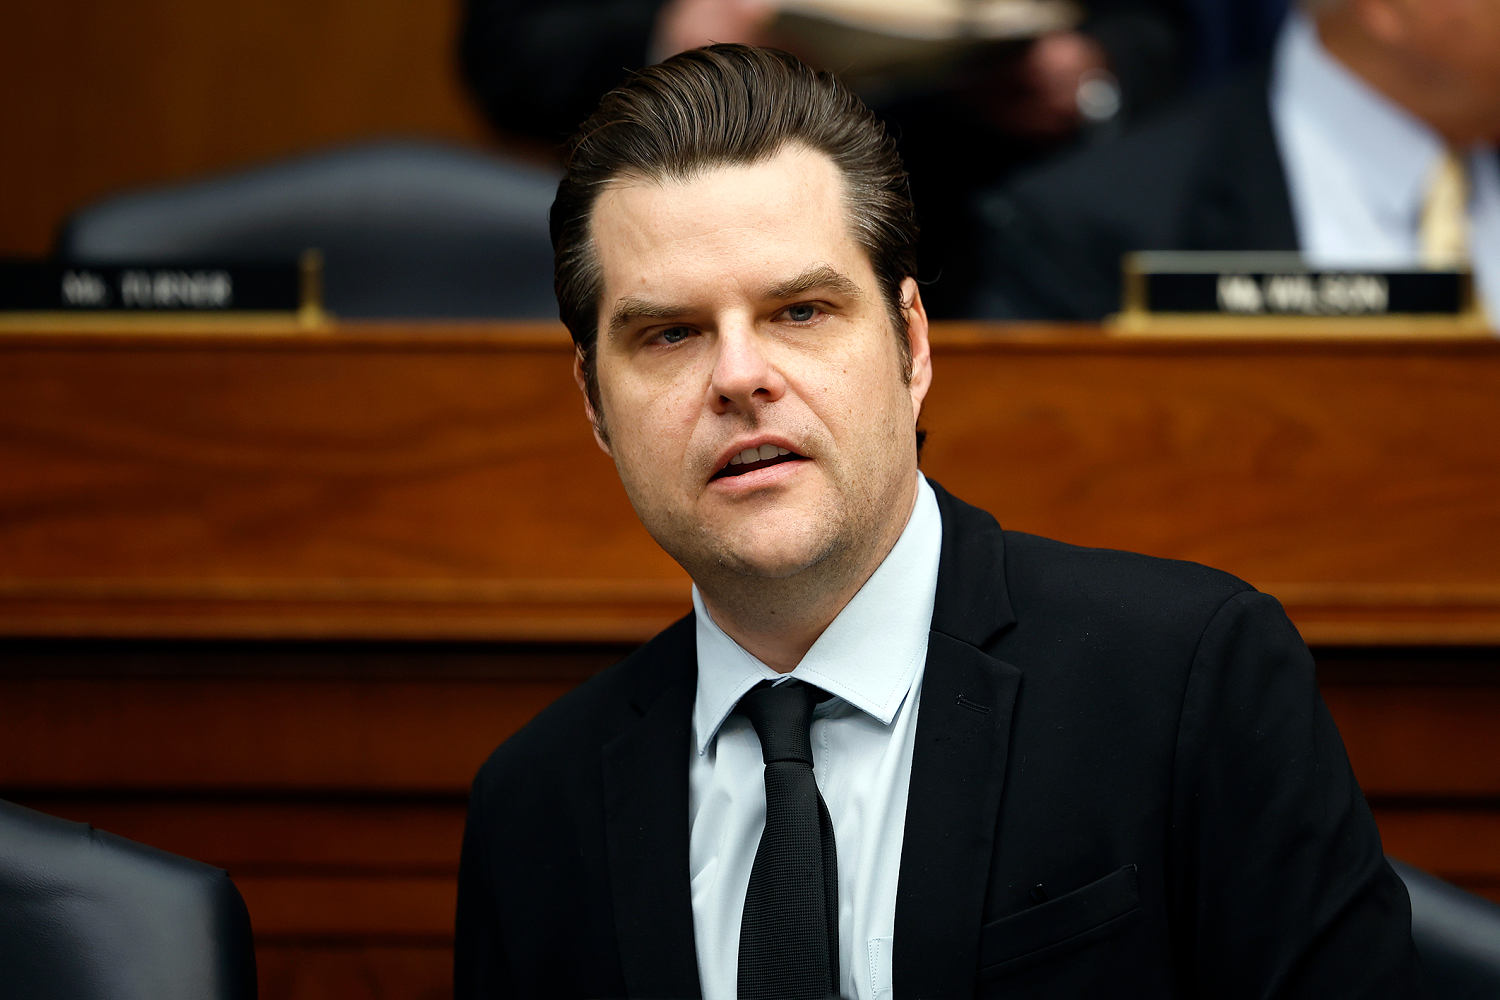 Ethics Committee investigating Rep. Matt Gaetz over alleged drug use and sexual misconduct